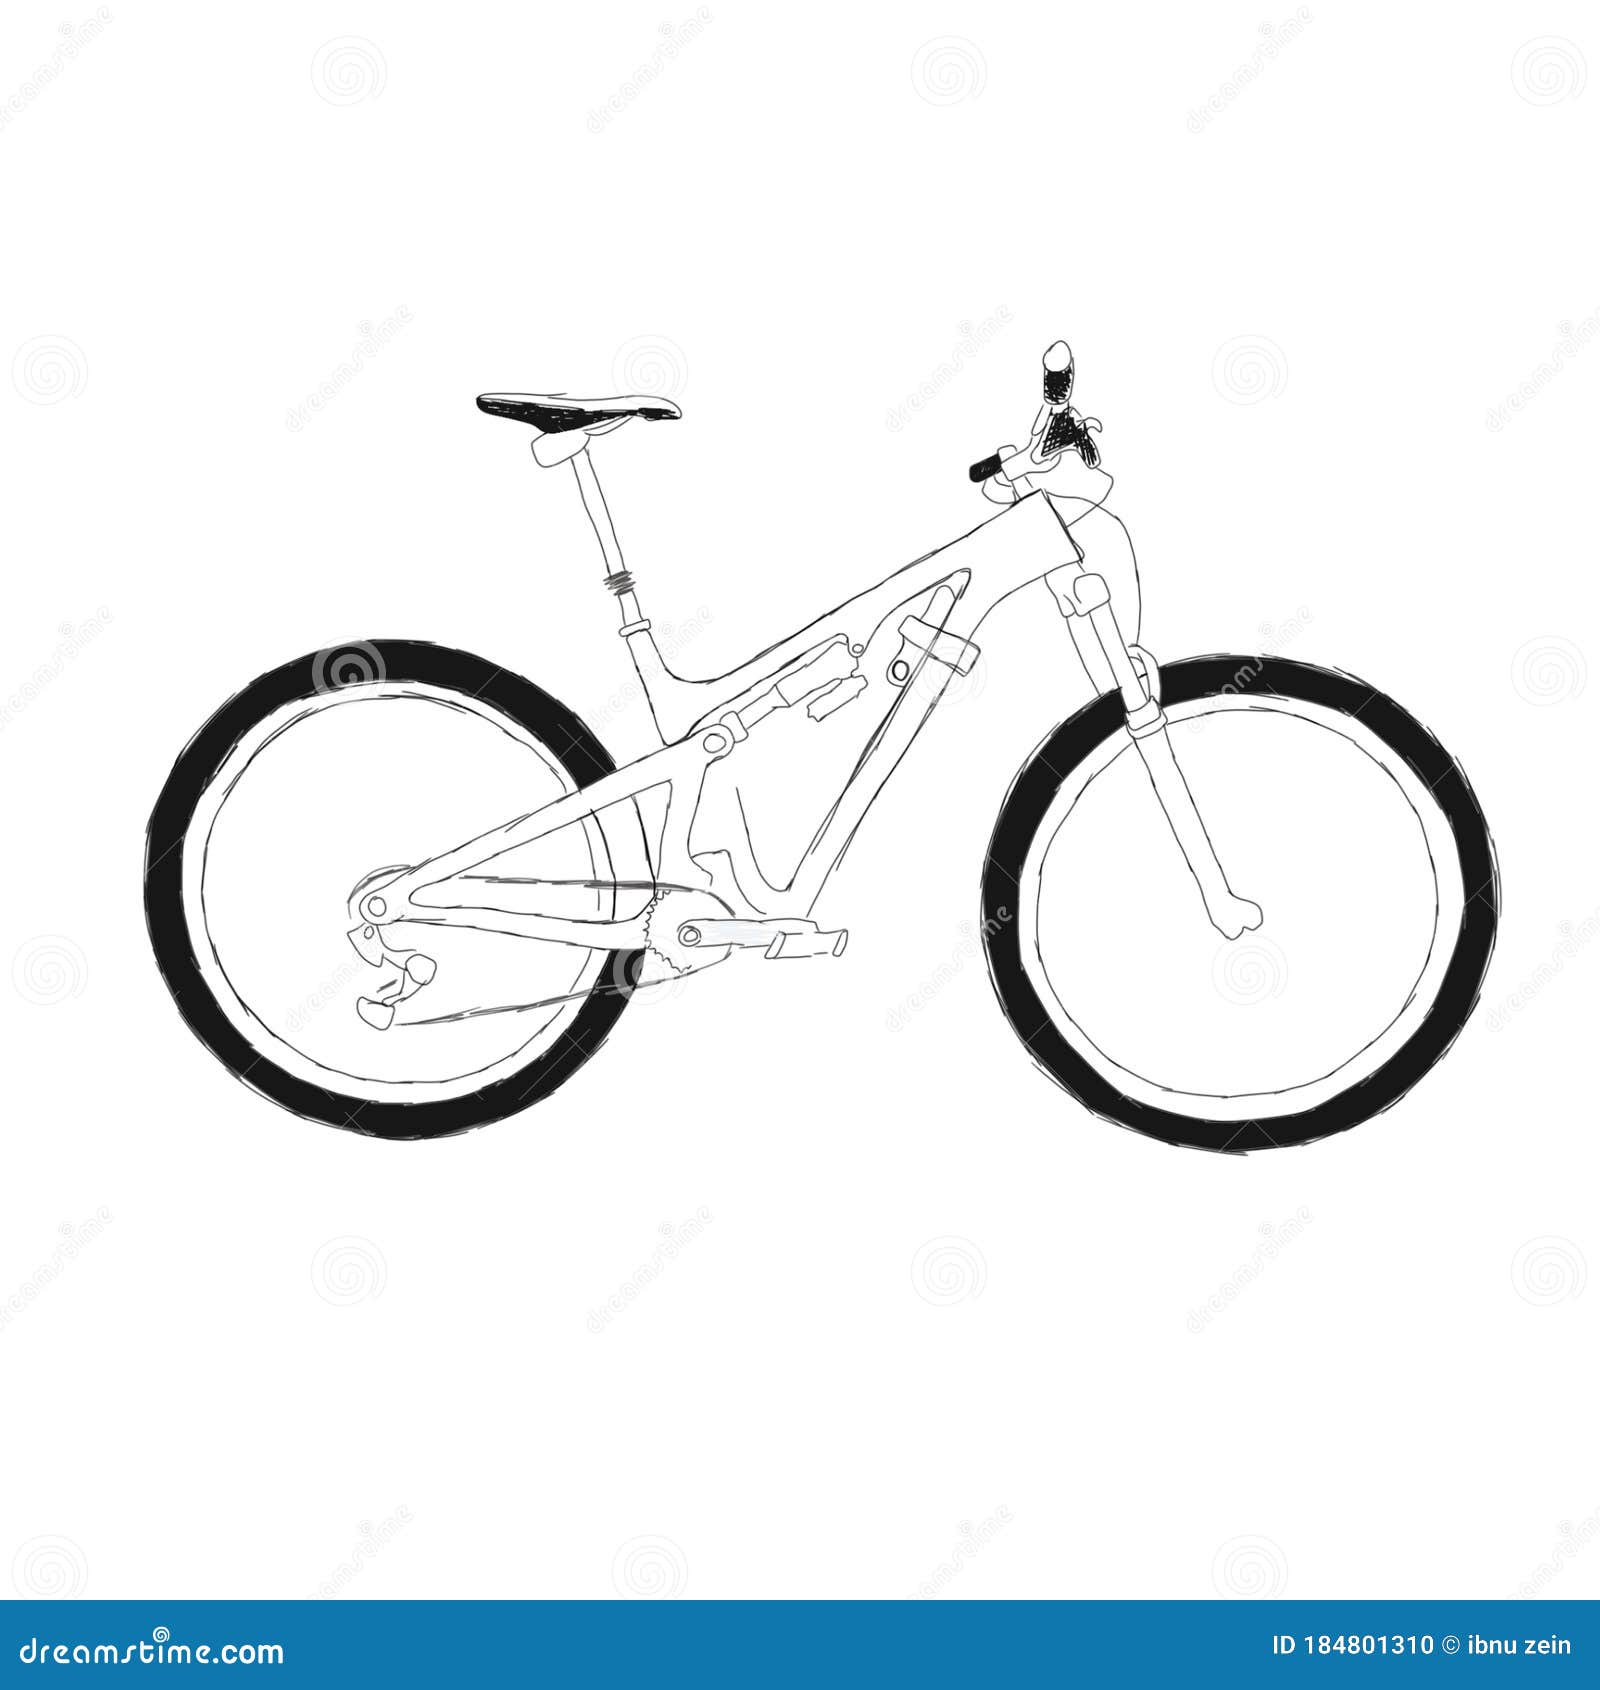 1,049 Bicycle Simple Hand Sketch Images, Stock Photos & Vectors |  Shutterstock